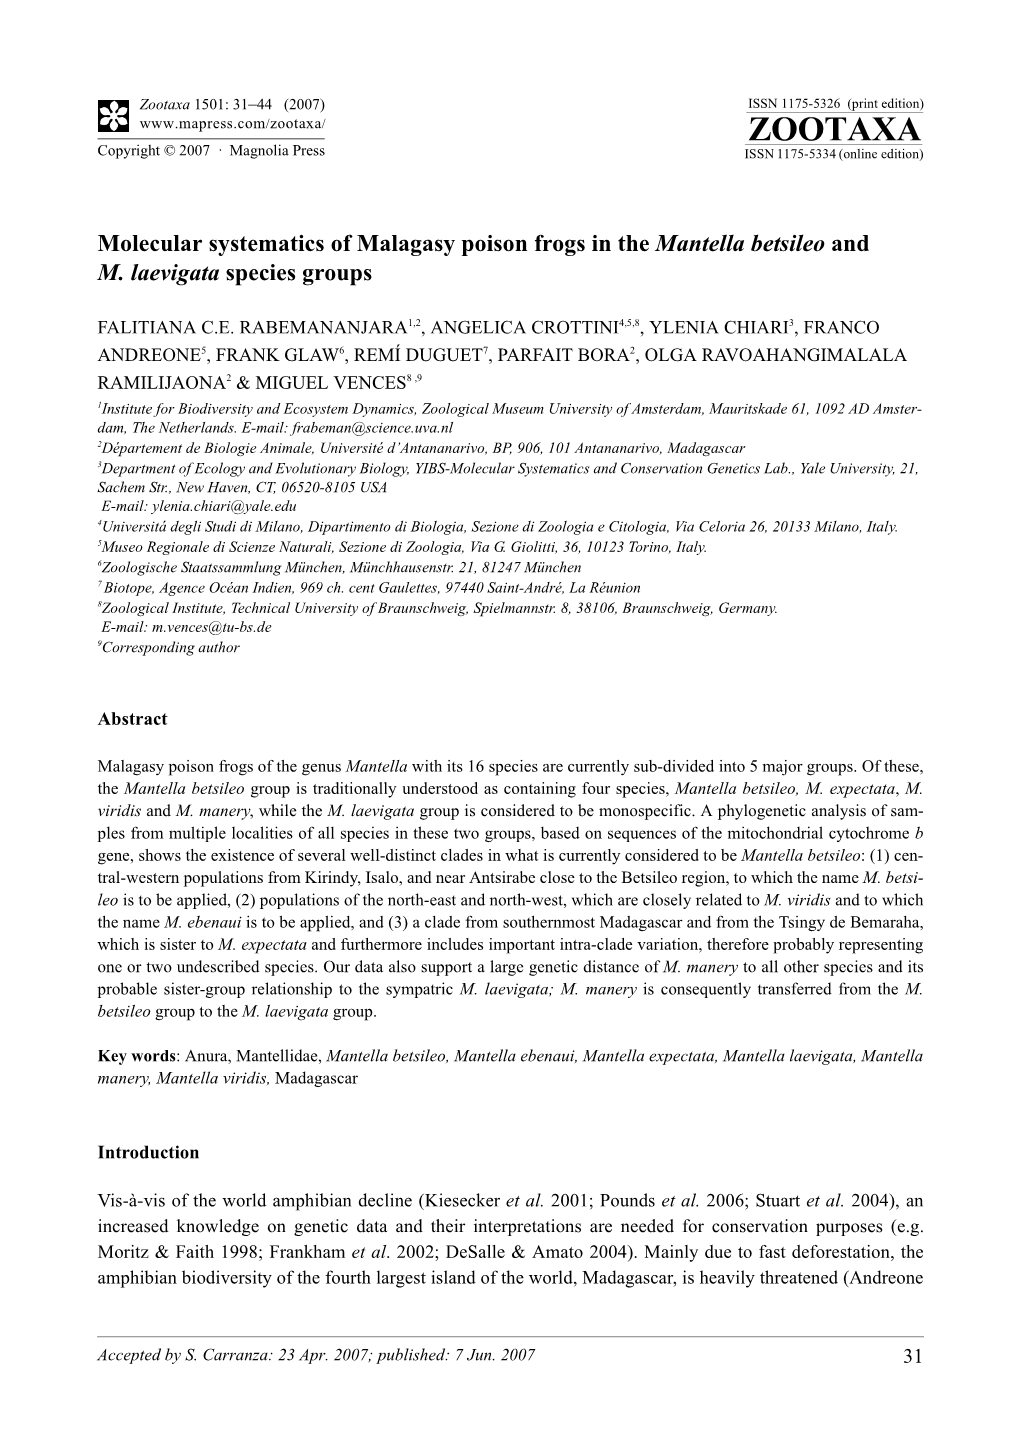 Zootaxa,Molecular Systematics of Malagasy Poison Frogs in The